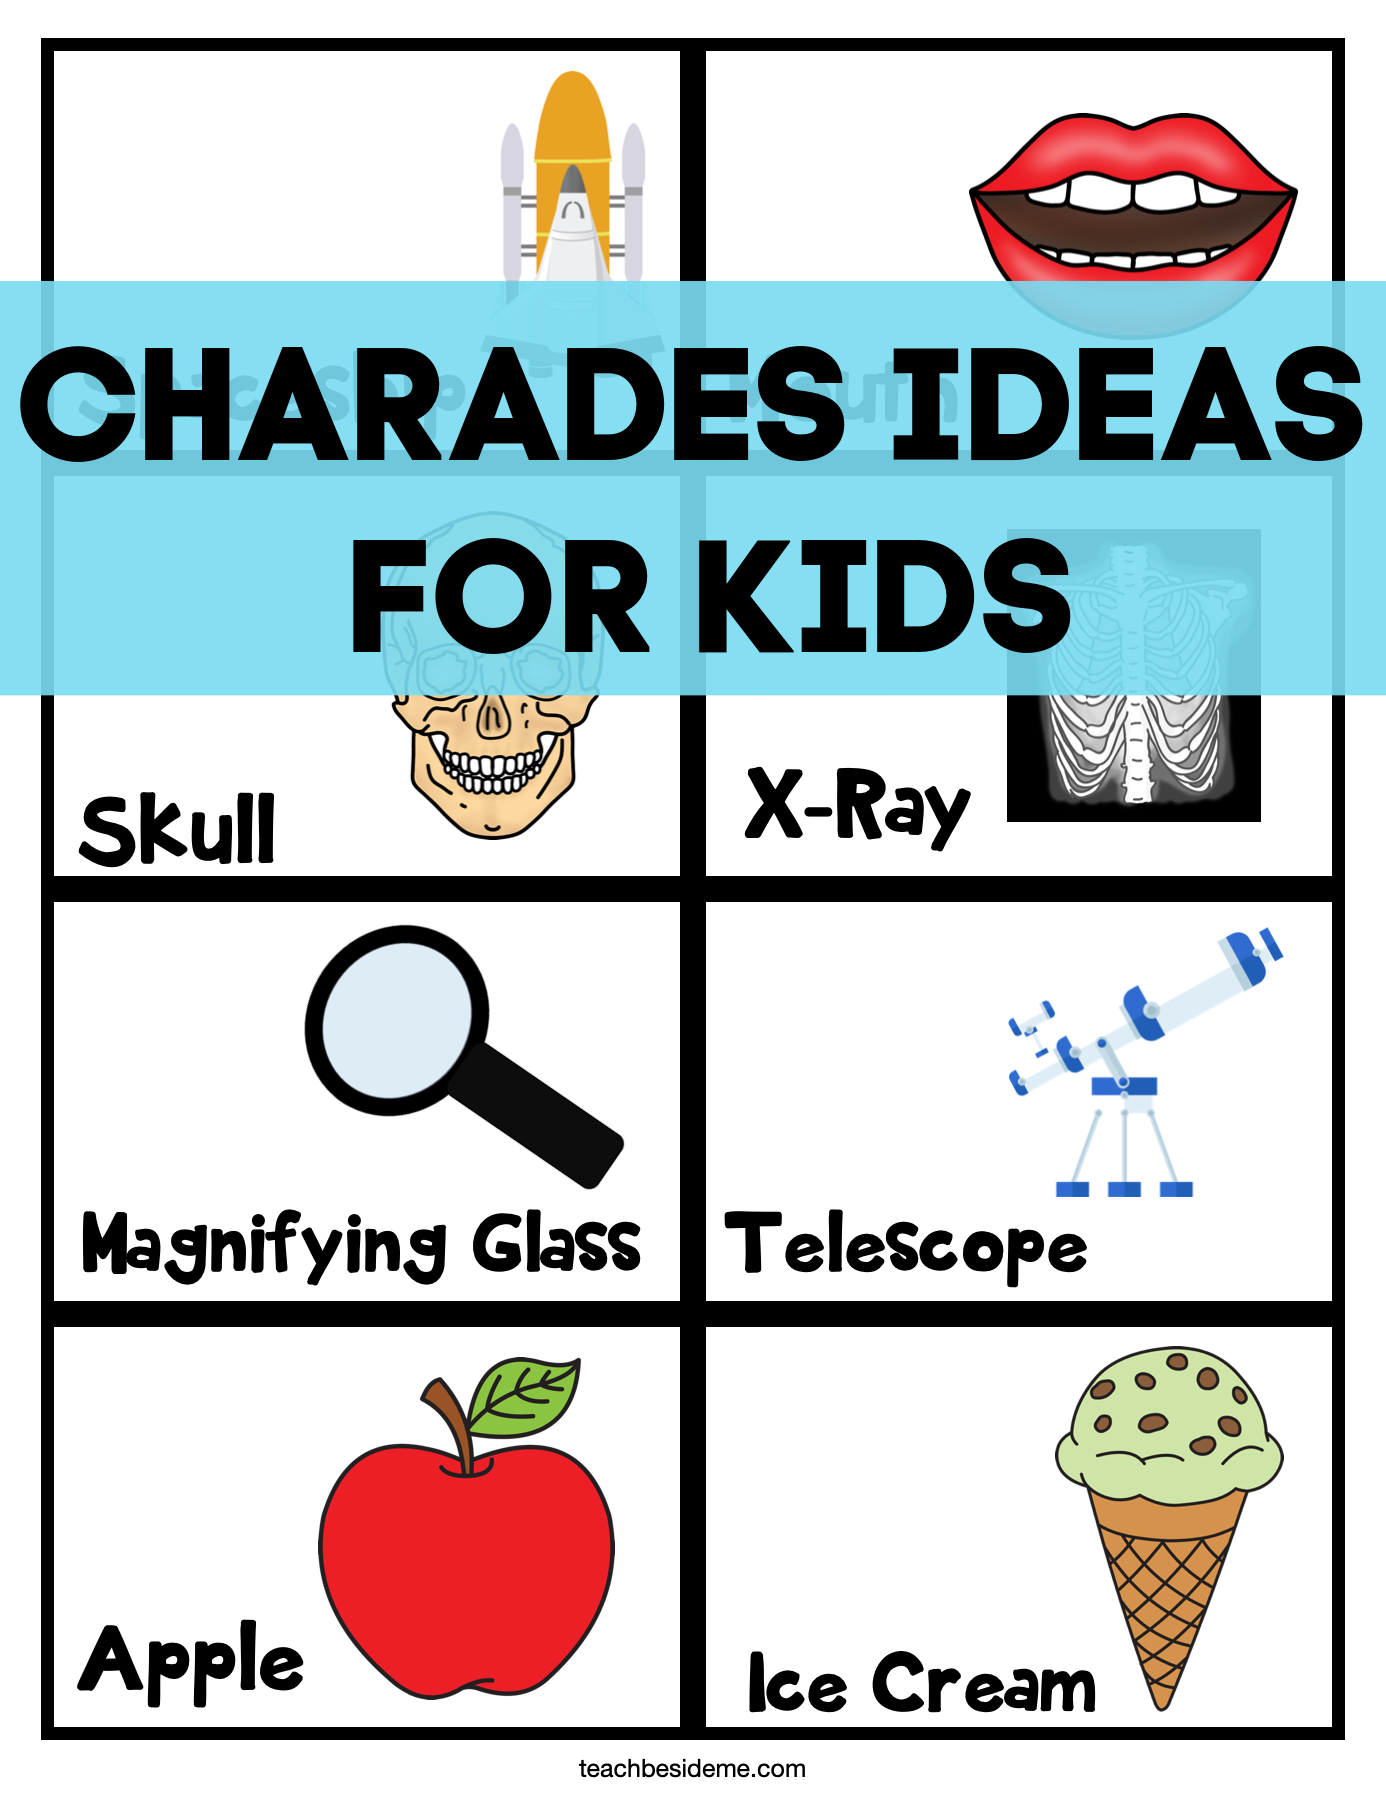 96 Printable Charades Ideas For Kids Teach Beside Me - Free Printable Charades Cards